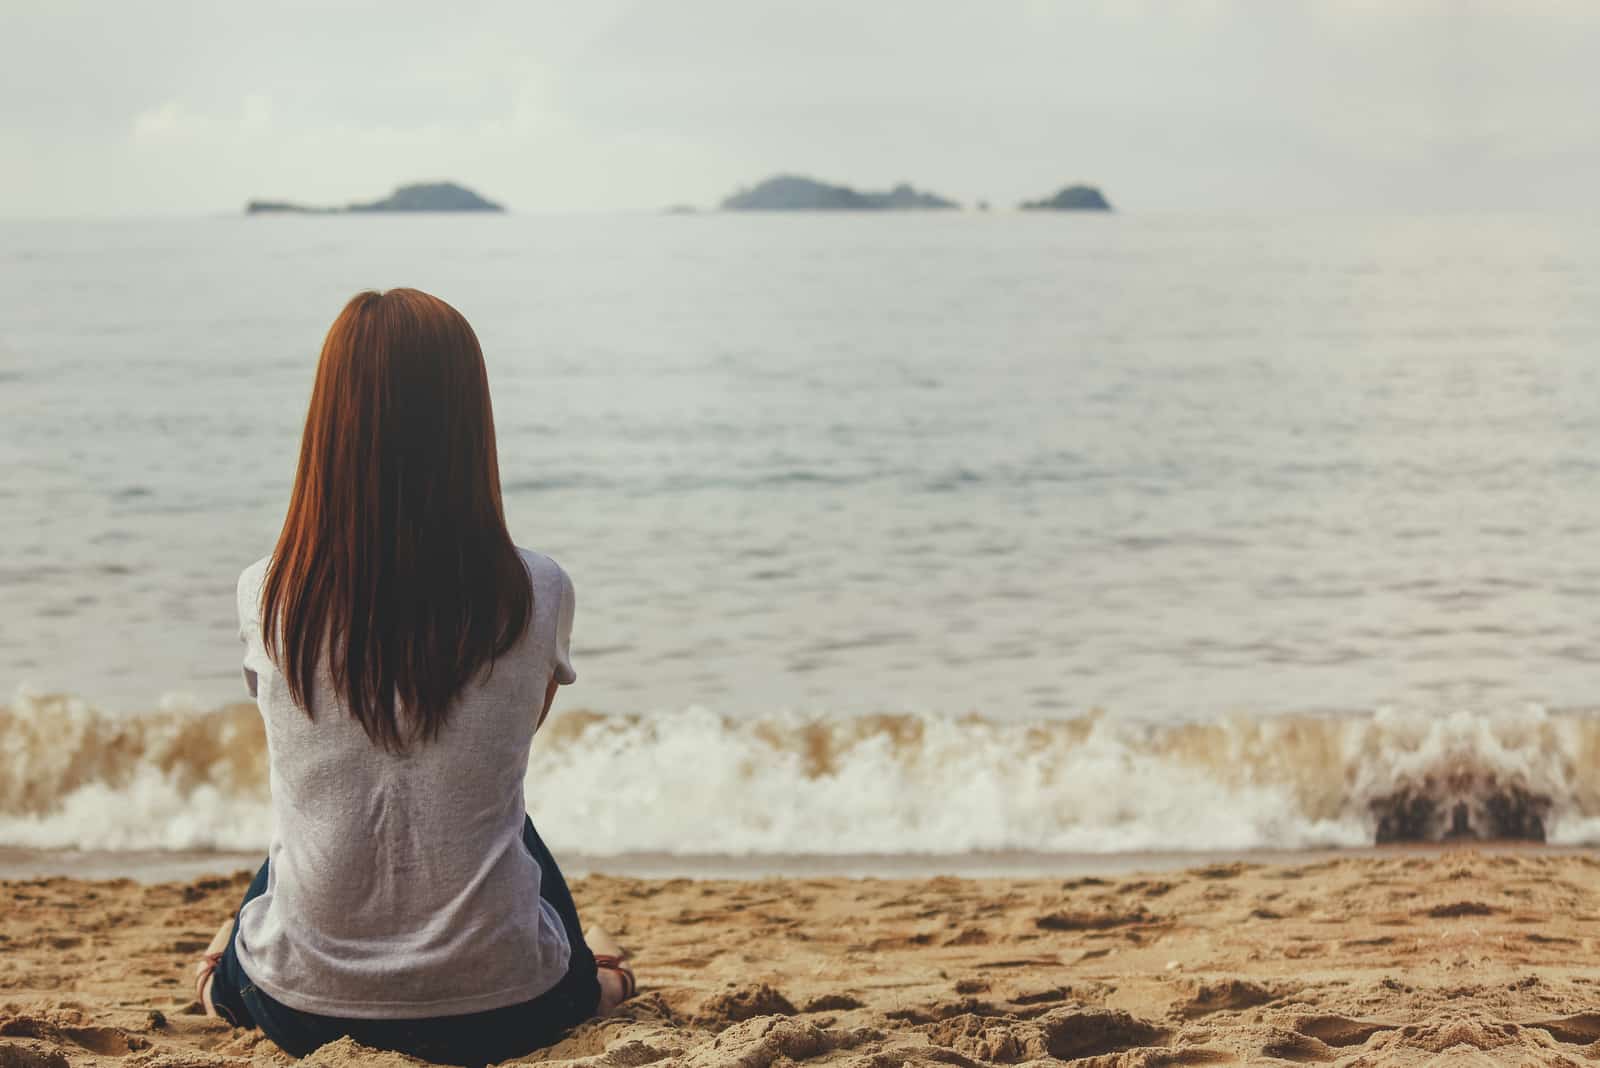 a woman with long brown hair sits on the beach and looks out to sea